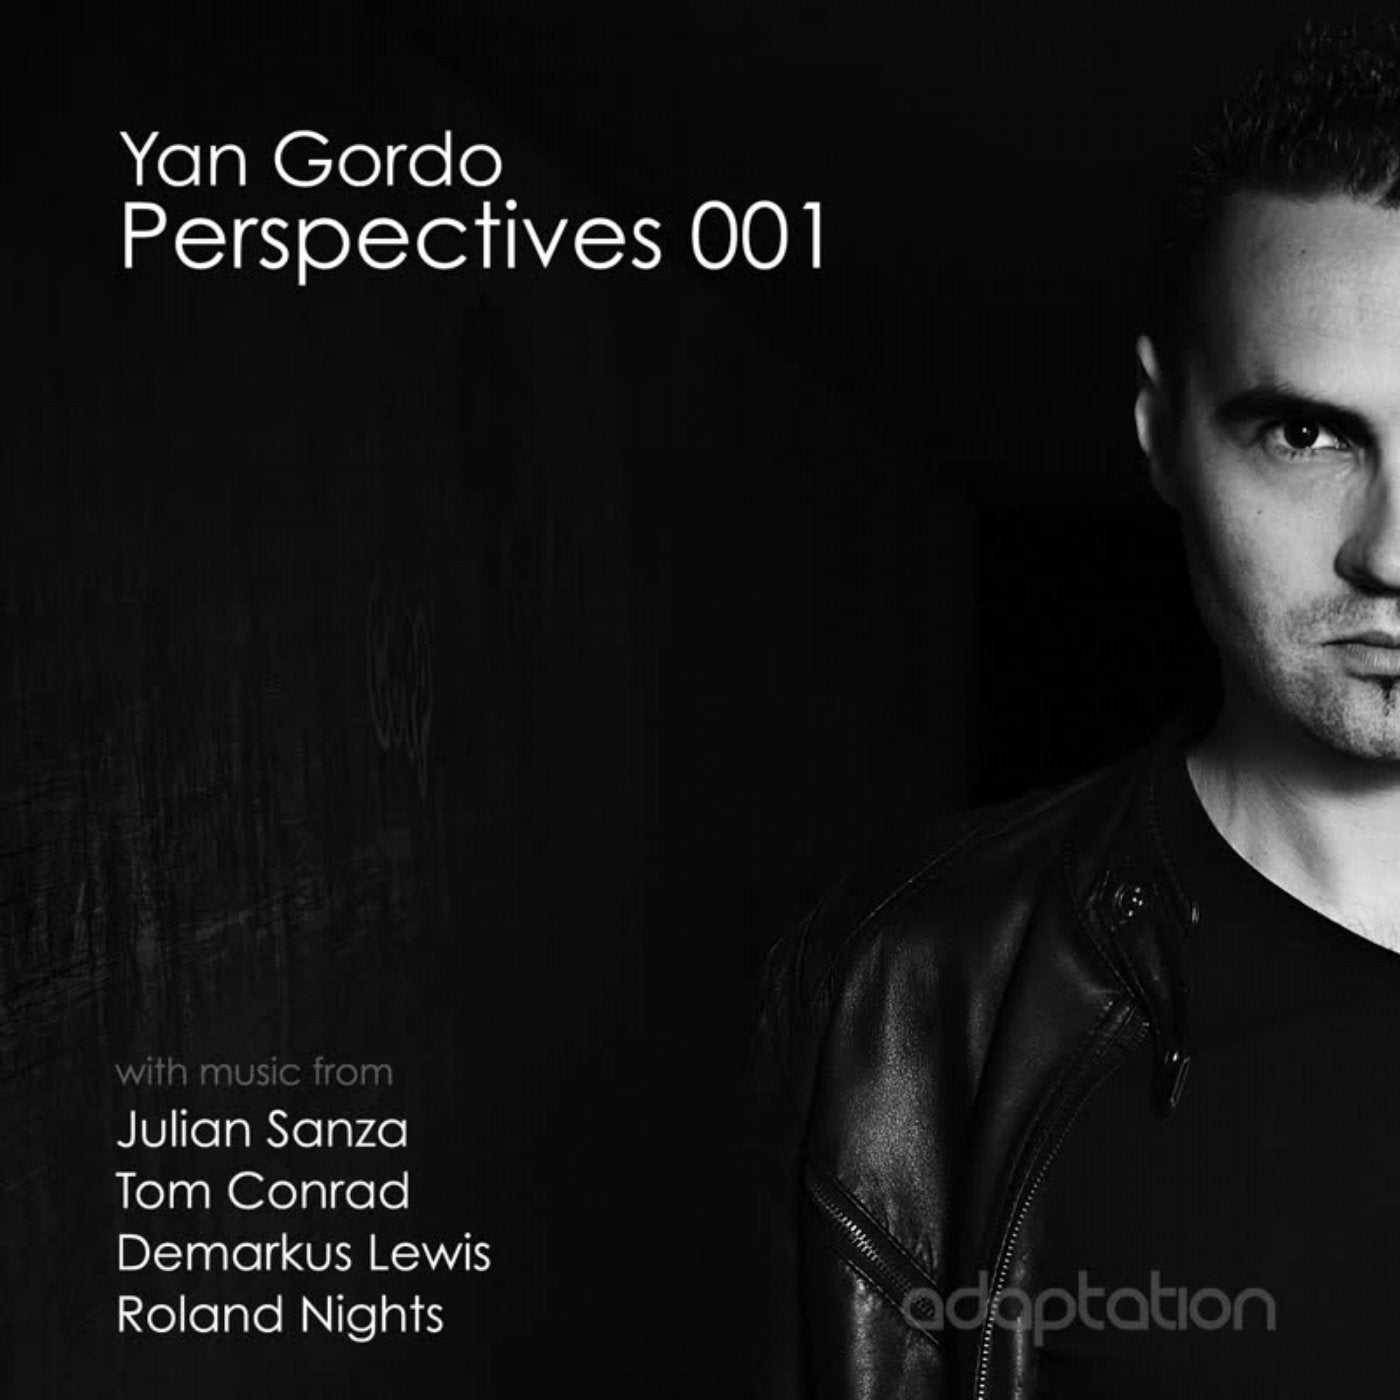 Perspectives 001 (Curated by Yan Gordo)